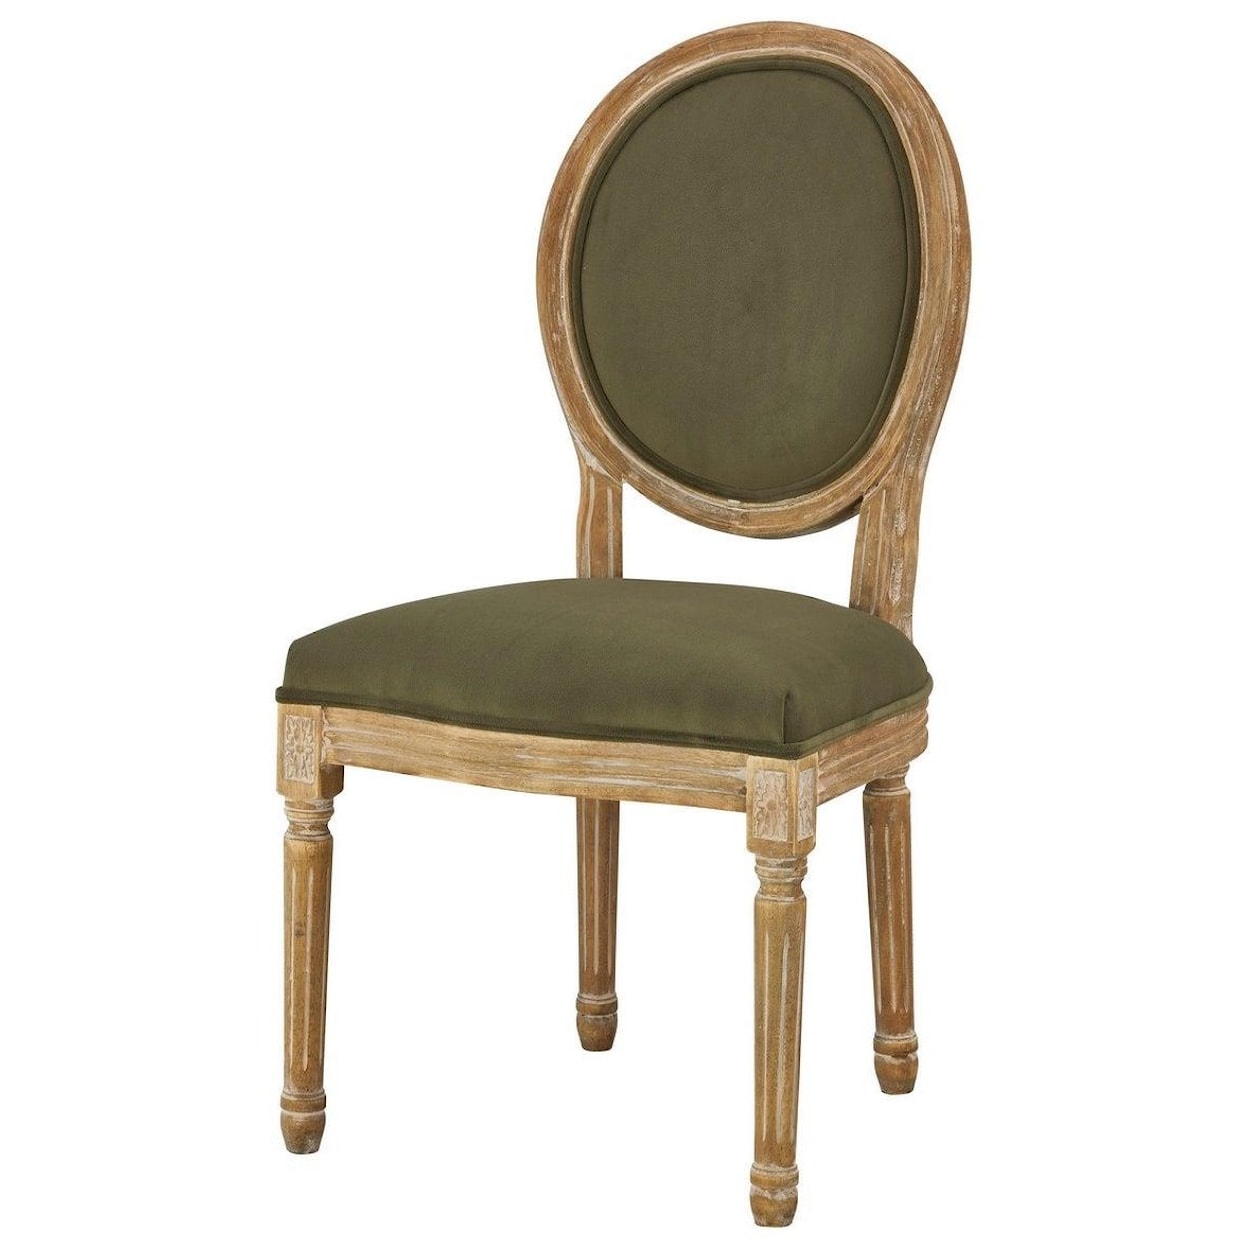 Forty West Designs Maxwell SIDE CHAIR (AGRAVE)